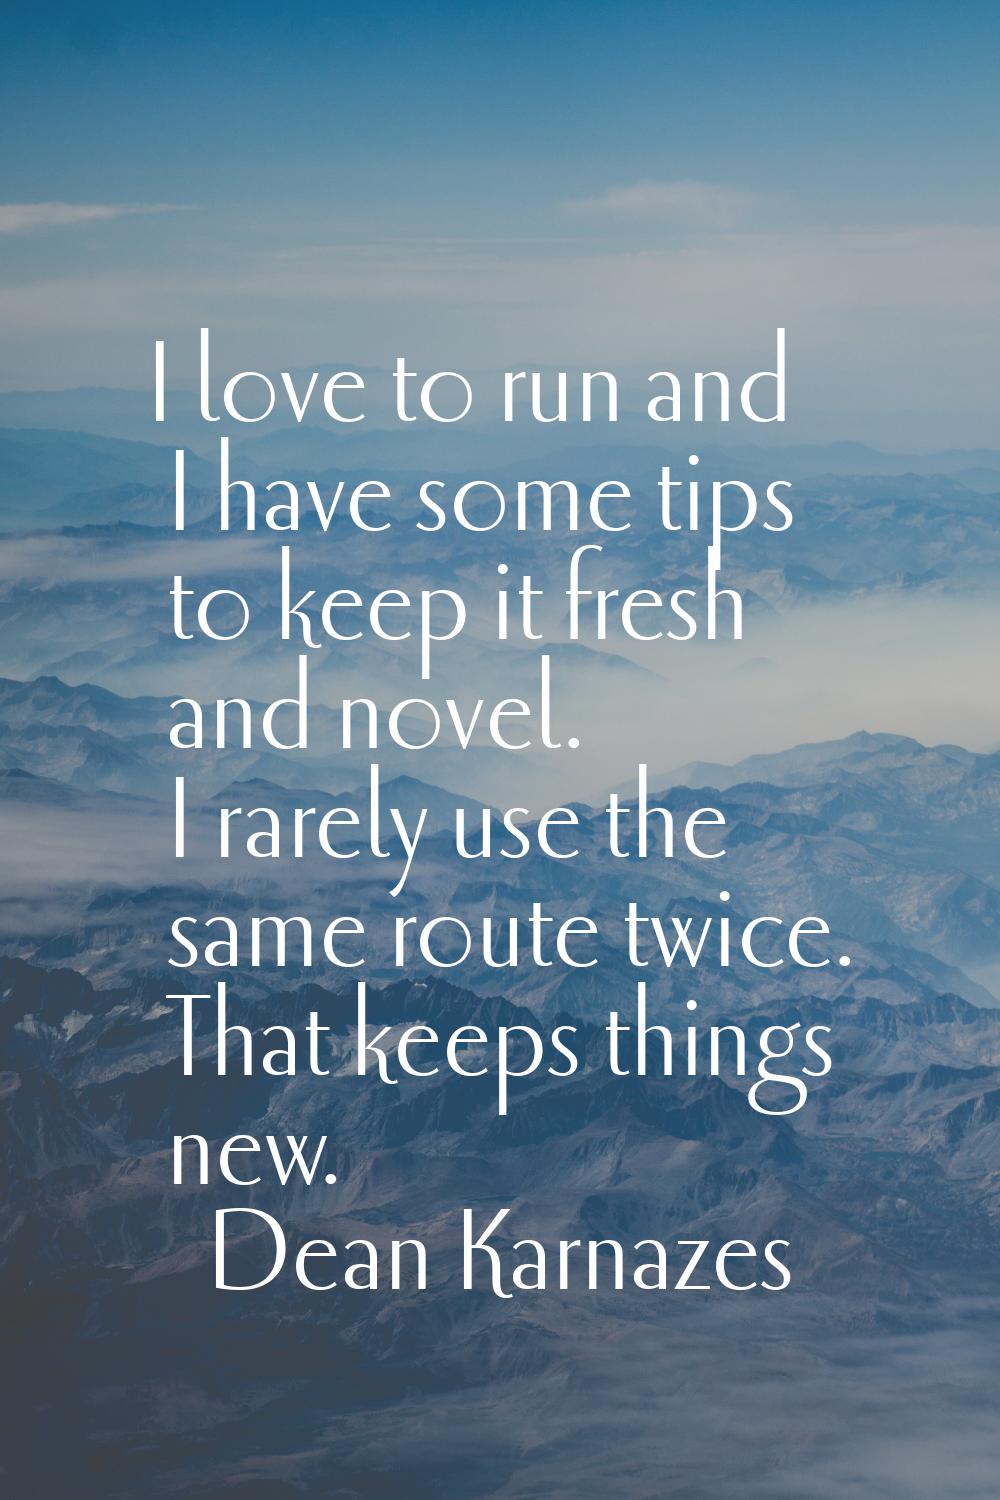 I love to run and I have some tips to keep it fresh and novel. I rarely use the same route twice. T